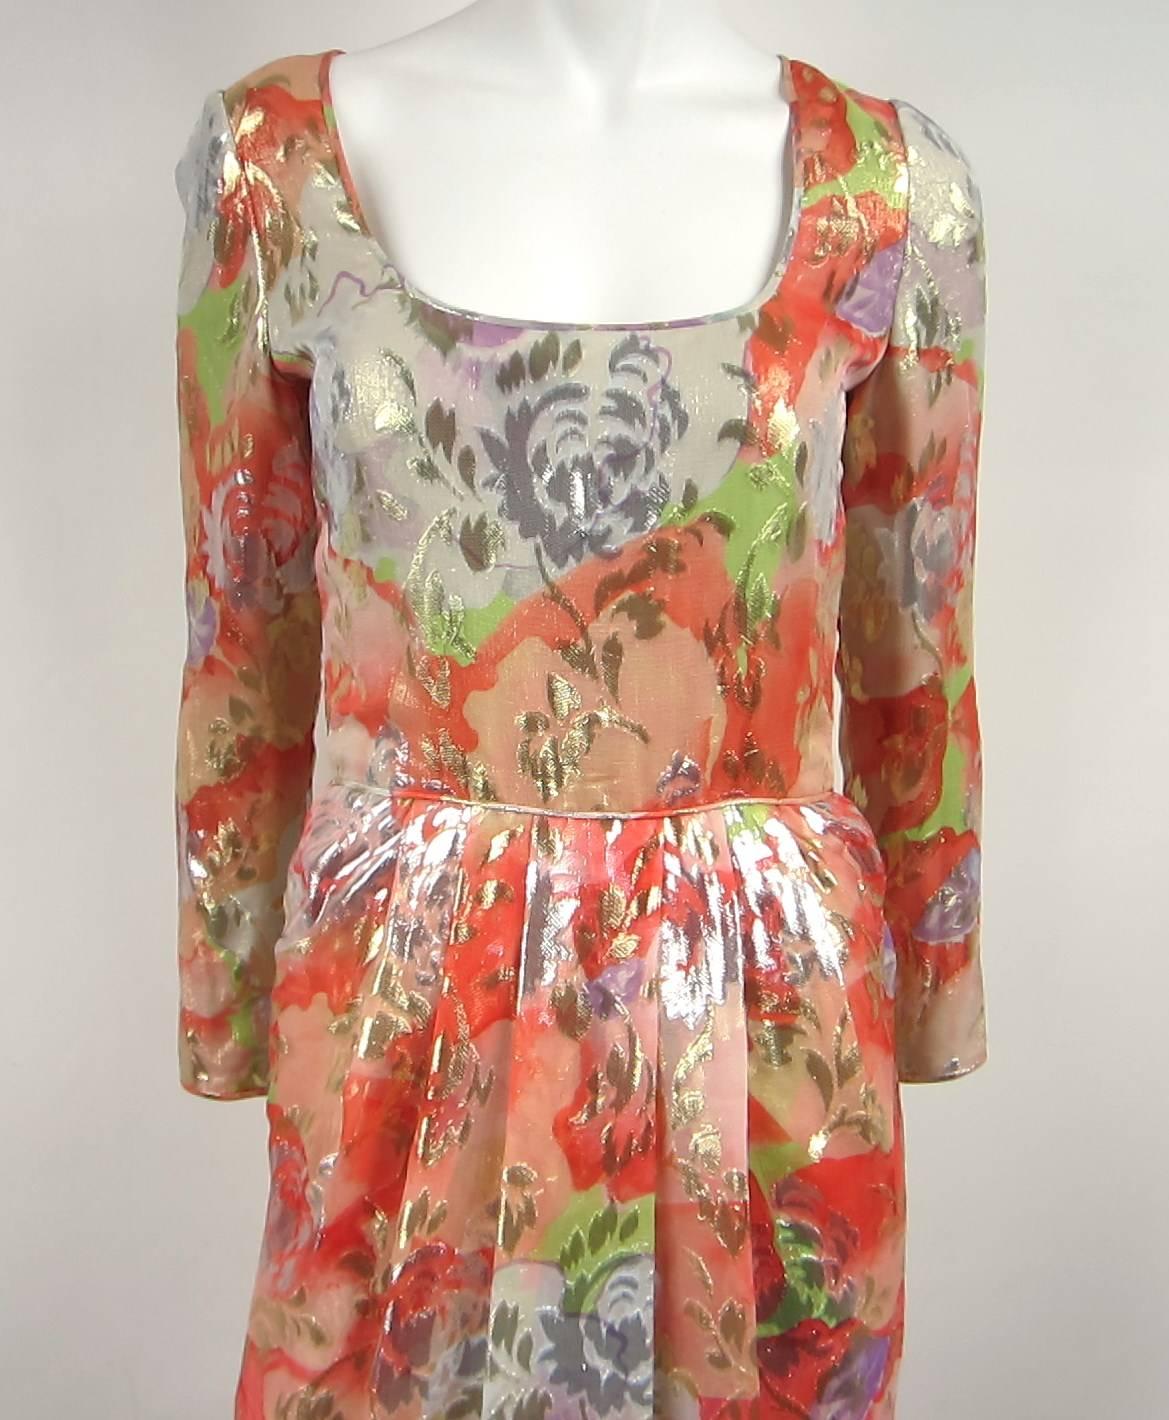 Stunning colors on this Galanos Dress. Featuring a Zippered Back, Zippered Sleeve and Plunging squared neckline. Measures- Bust 36 inches --Waist 25 inches-- Hips 35 inches --Length 40.5  inches shoulder to hem. A stunning piece for a day or night